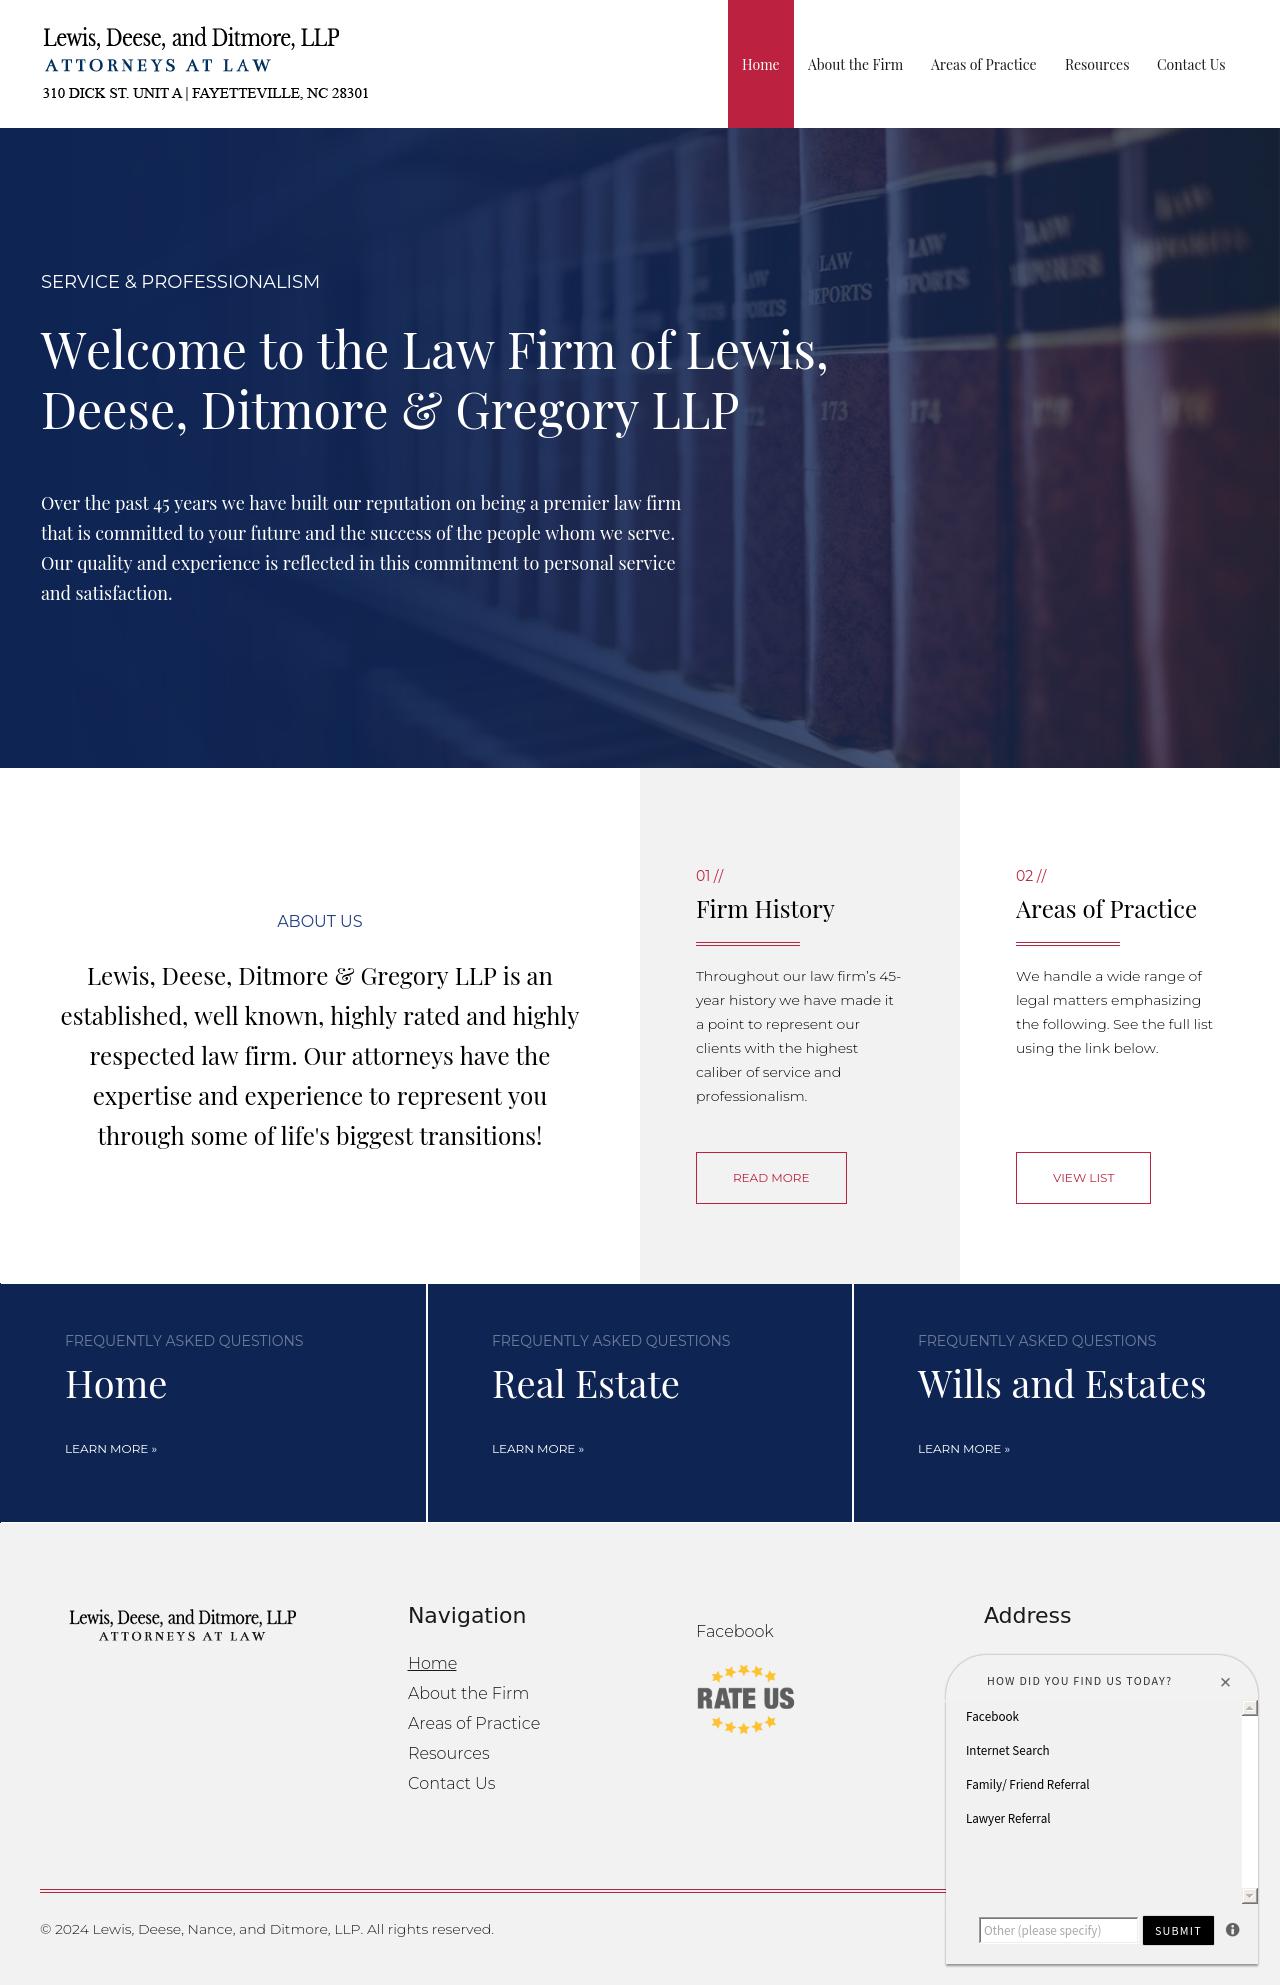 Lewis Deese Nance & Briggs, LLP - Fayetteville NC Lawyers